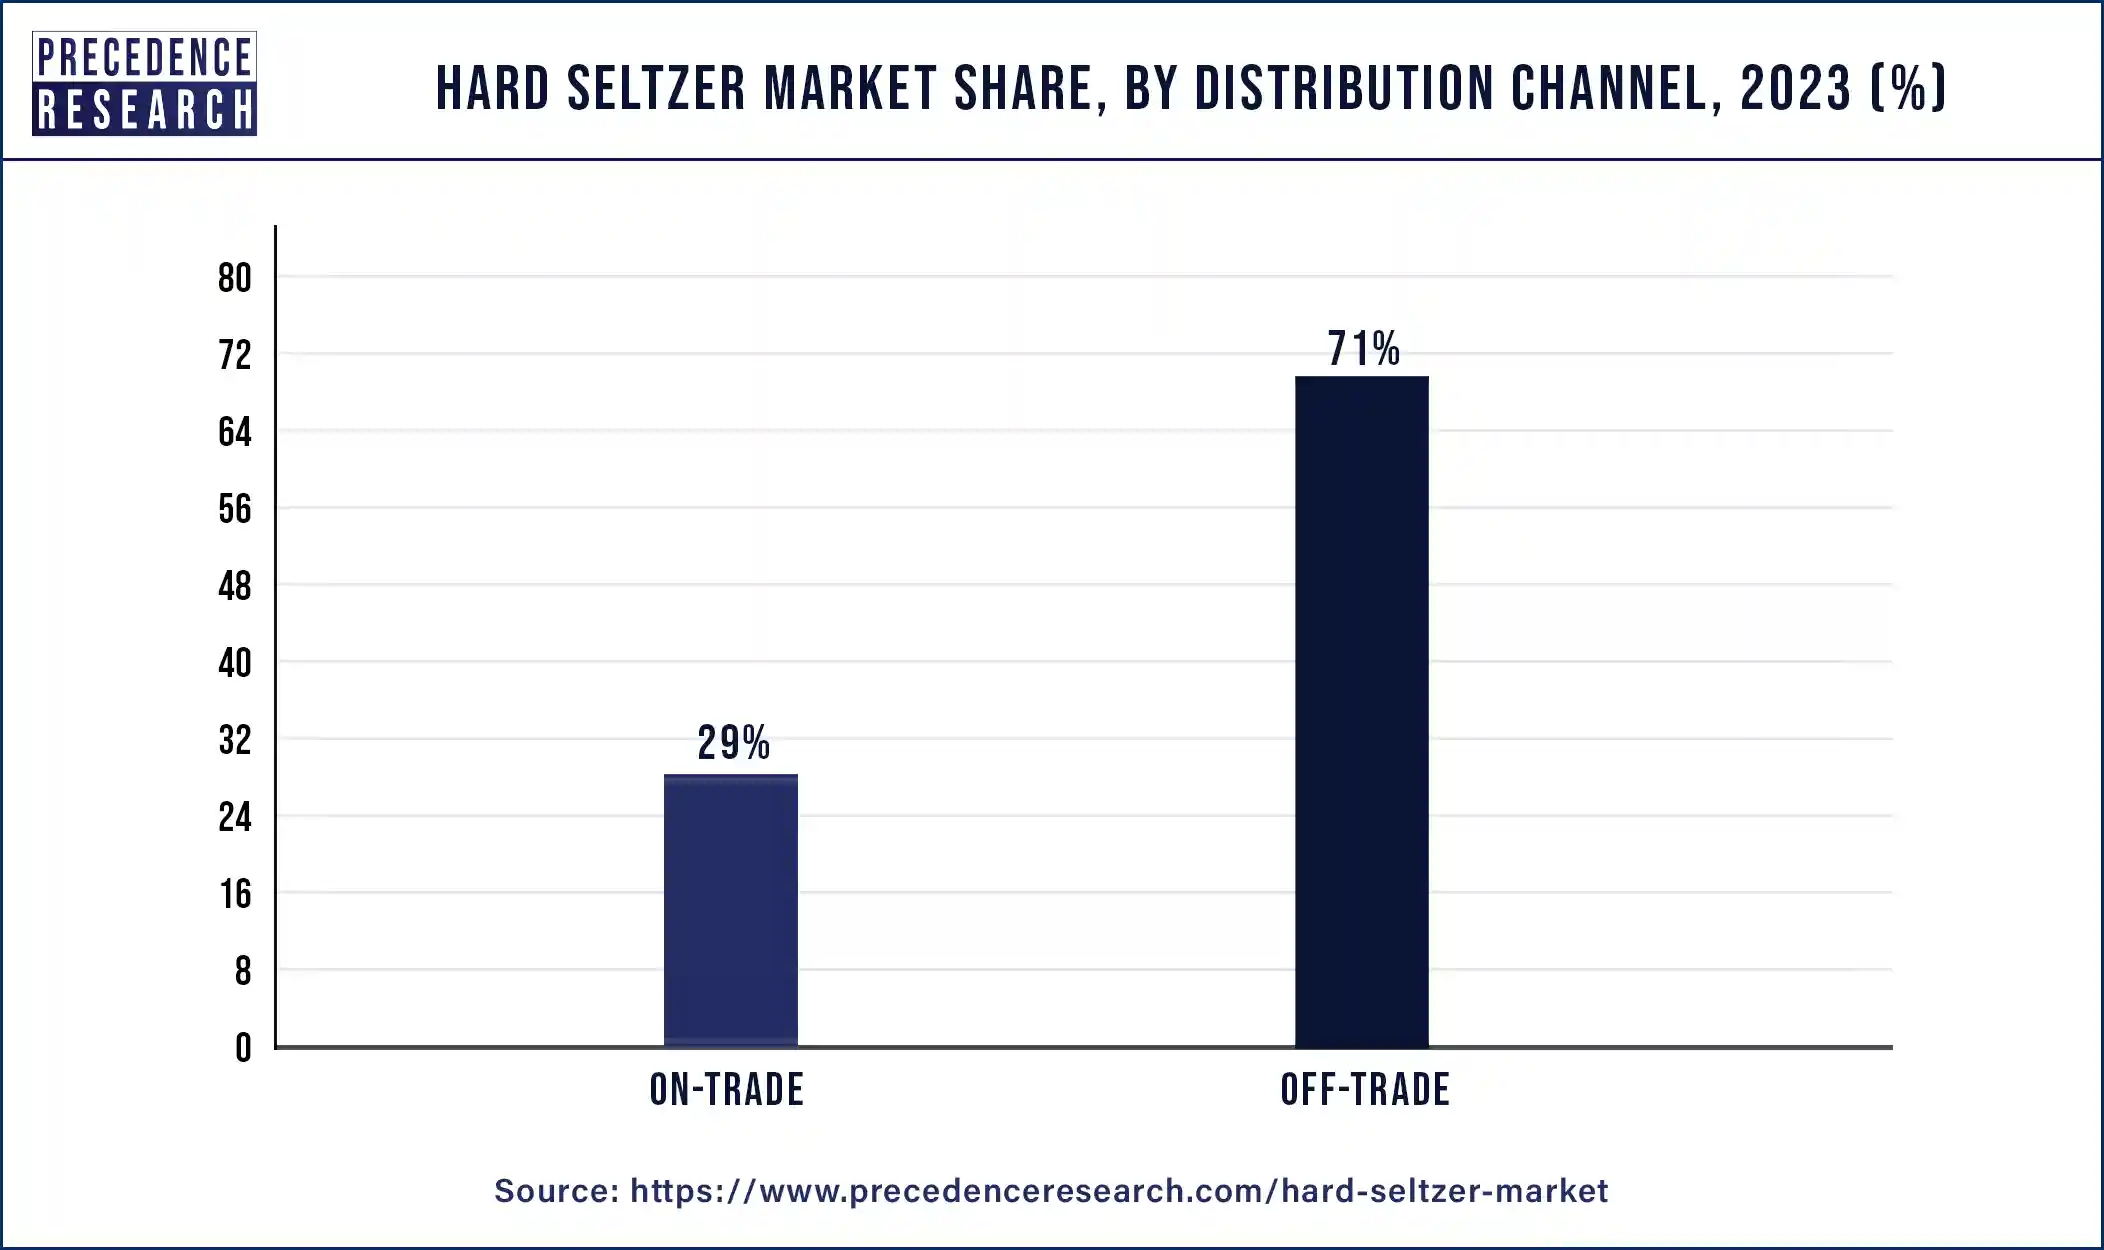 Hard Seltzer Market Share, By Distribution Channel, 2023 (%)